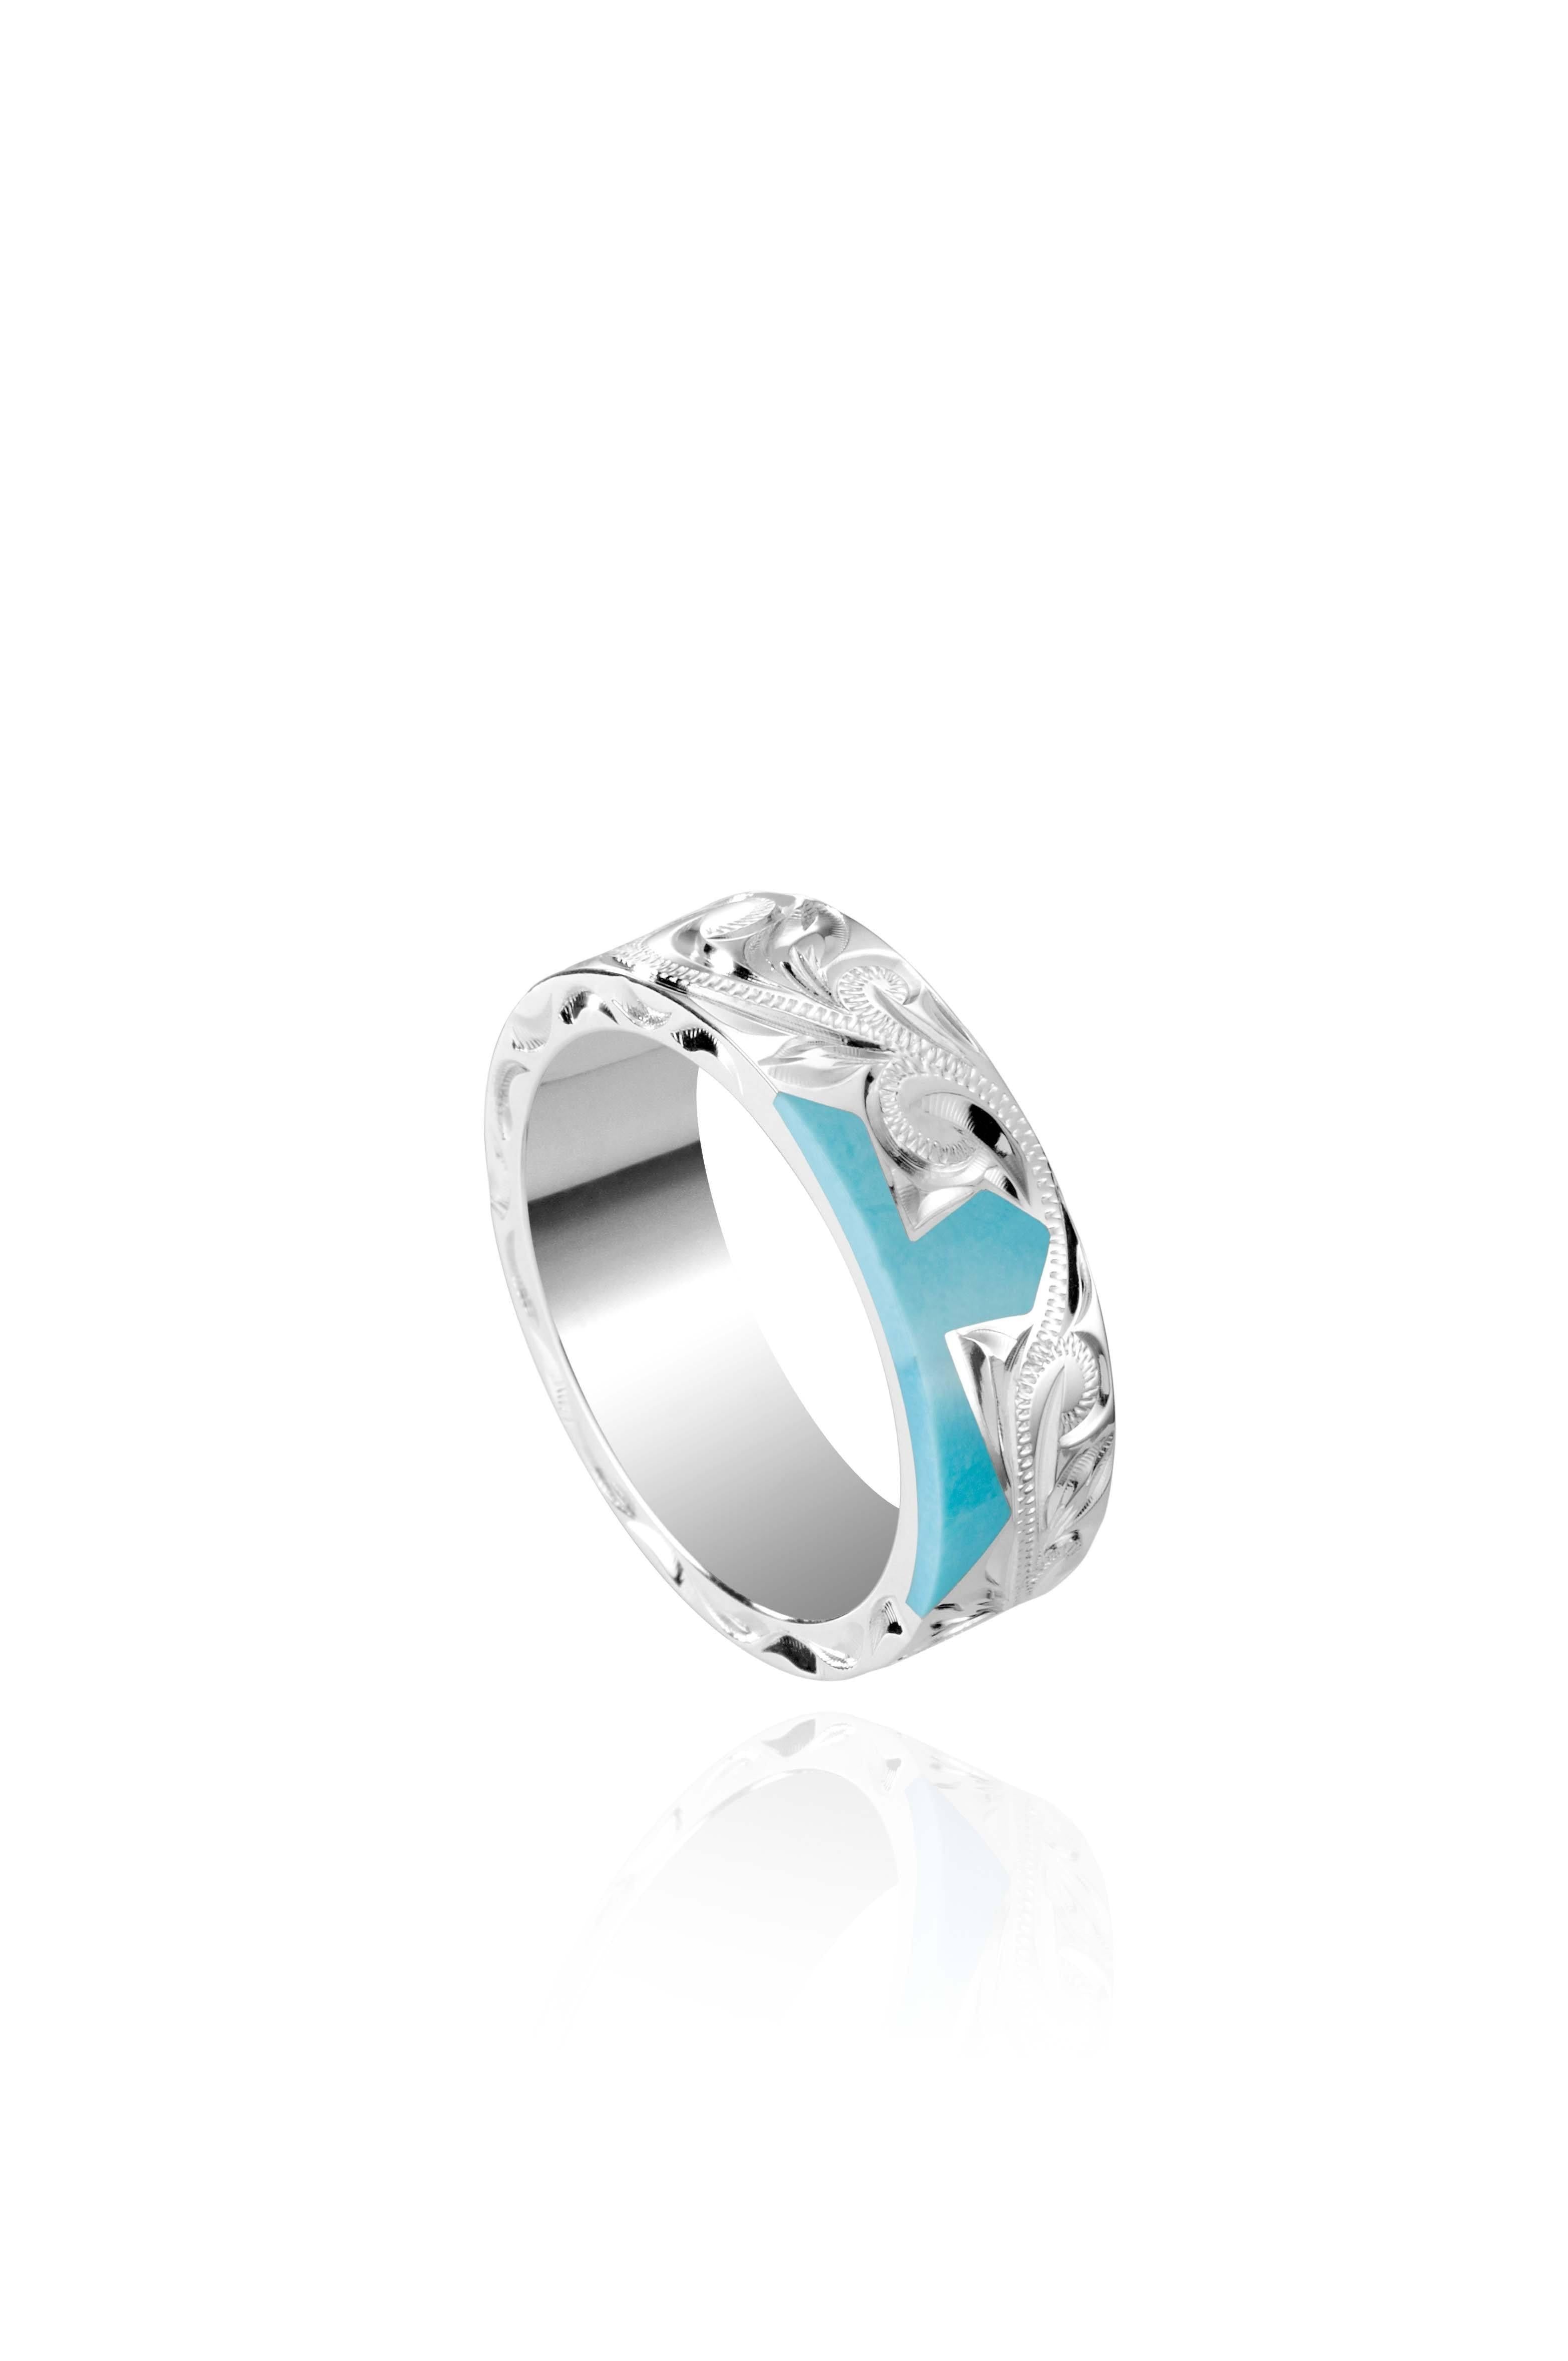 The picture shows a part of a set 925 sterling silver right half cross ring with hand-engravings and a turquoise gemstone.